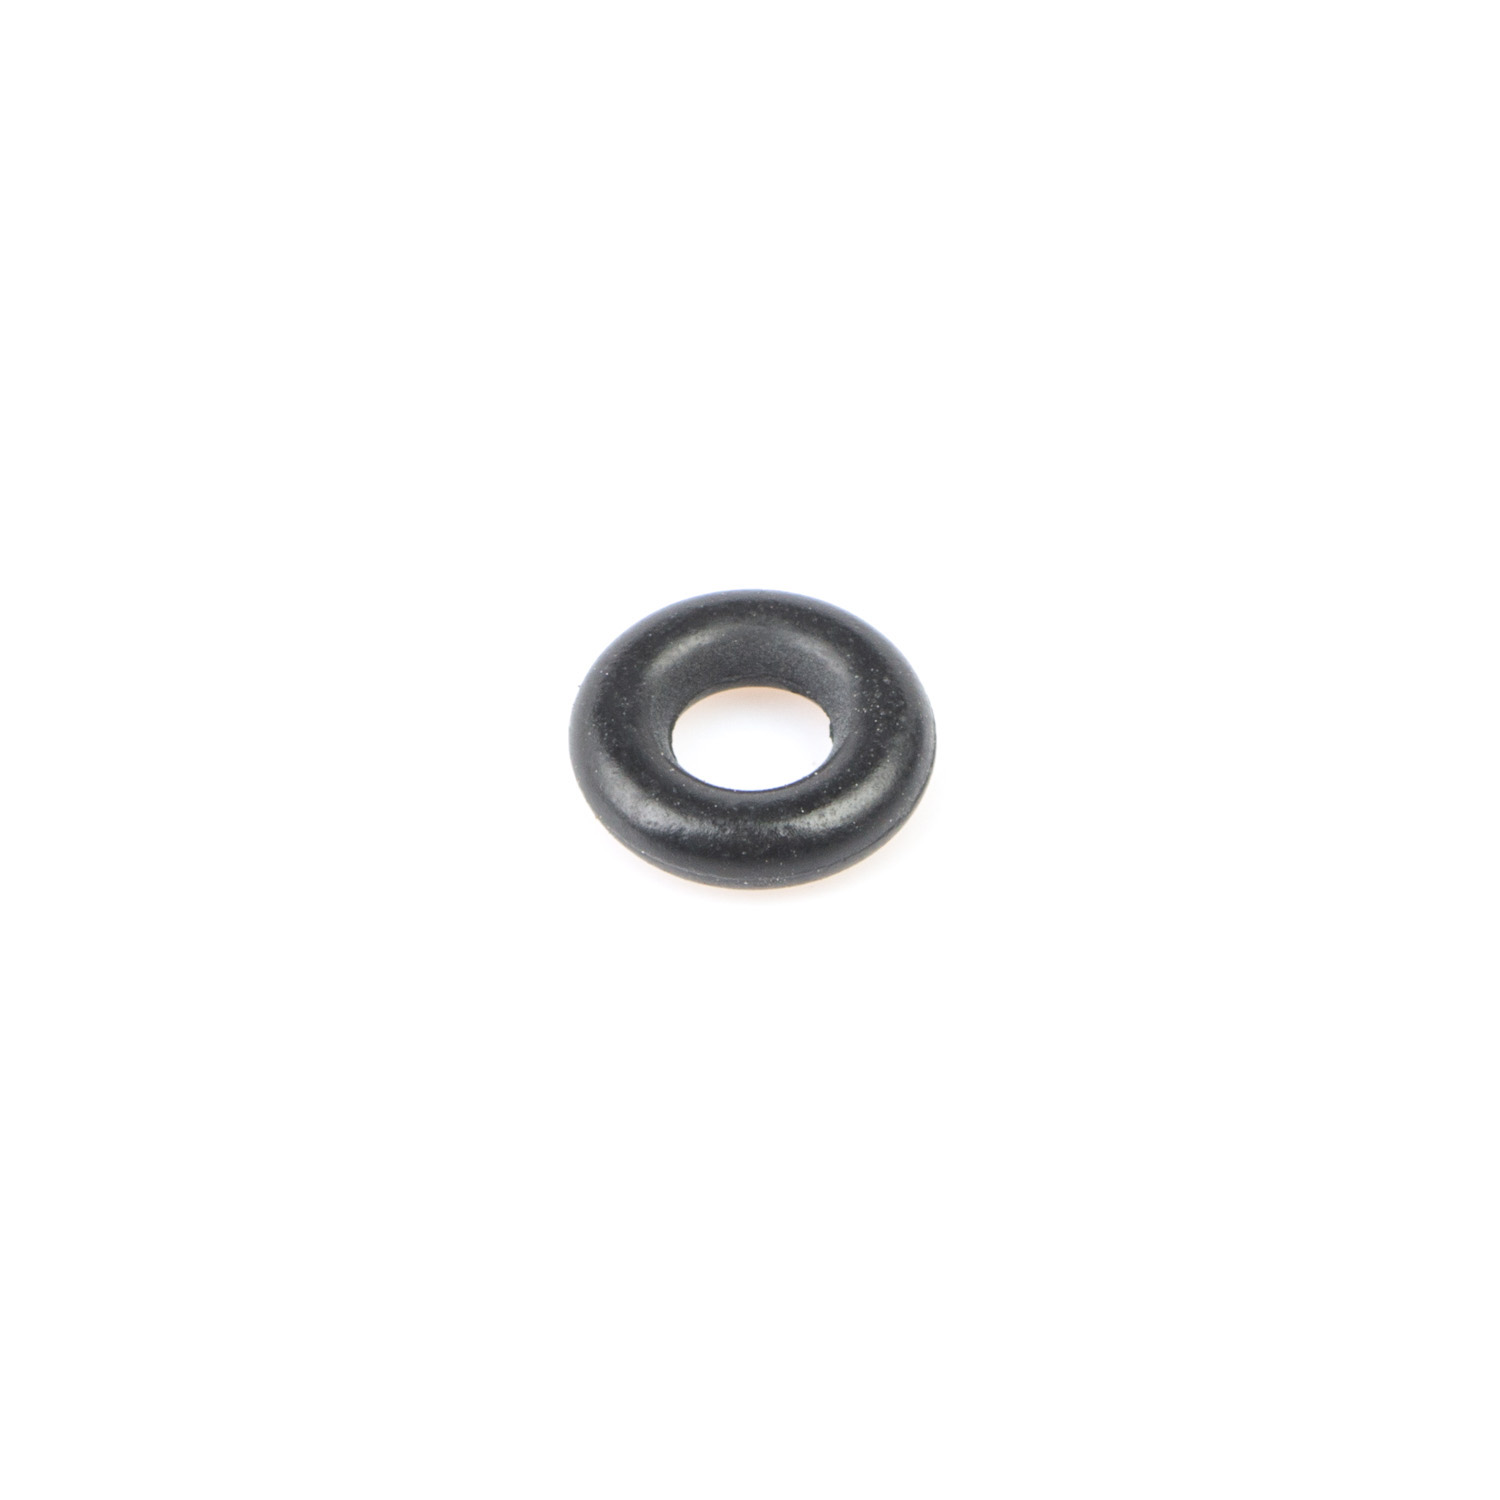 DT175MX Carb Idle Screw O-Ring